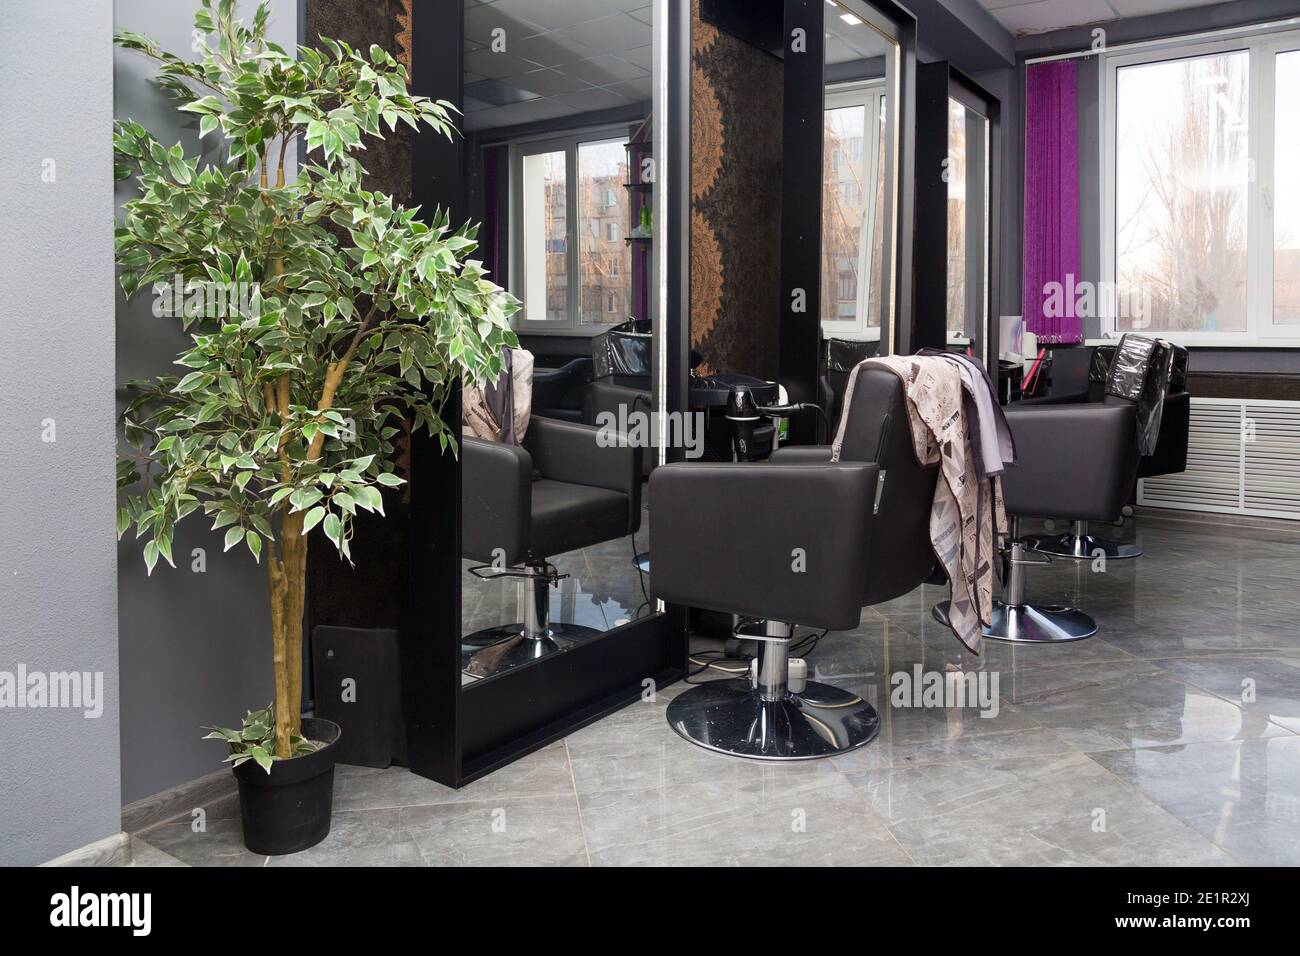 Page 3 - Empty Salon Chairs High Resolution Stock Photography and Images -  Alamy